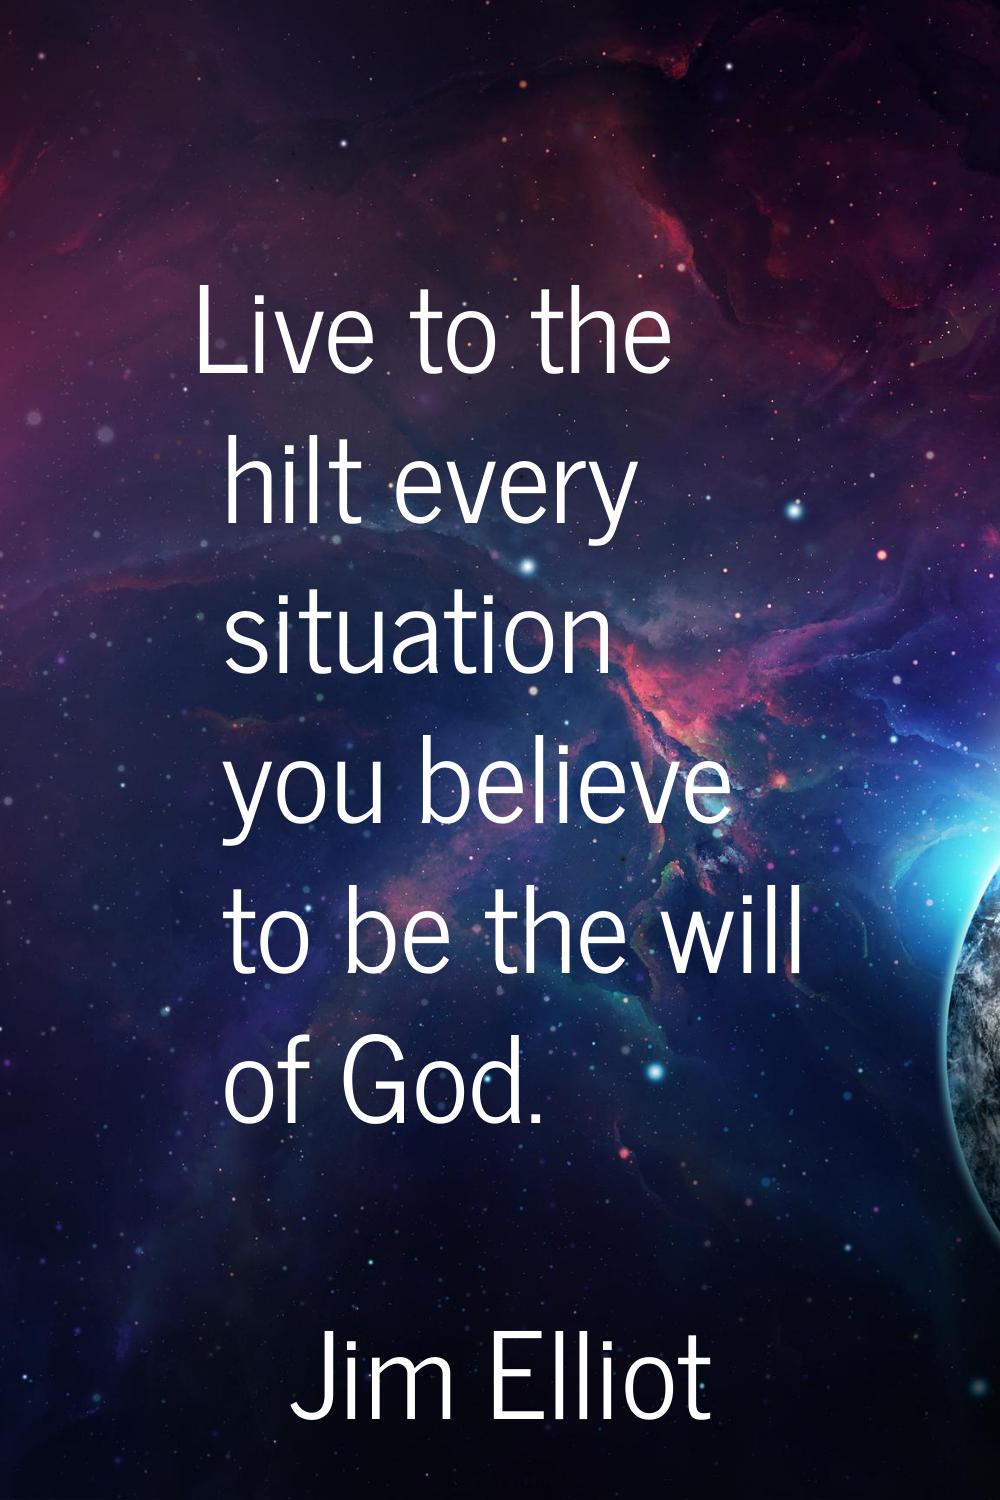 Live to the hilt every situation you believe to be the will of God.